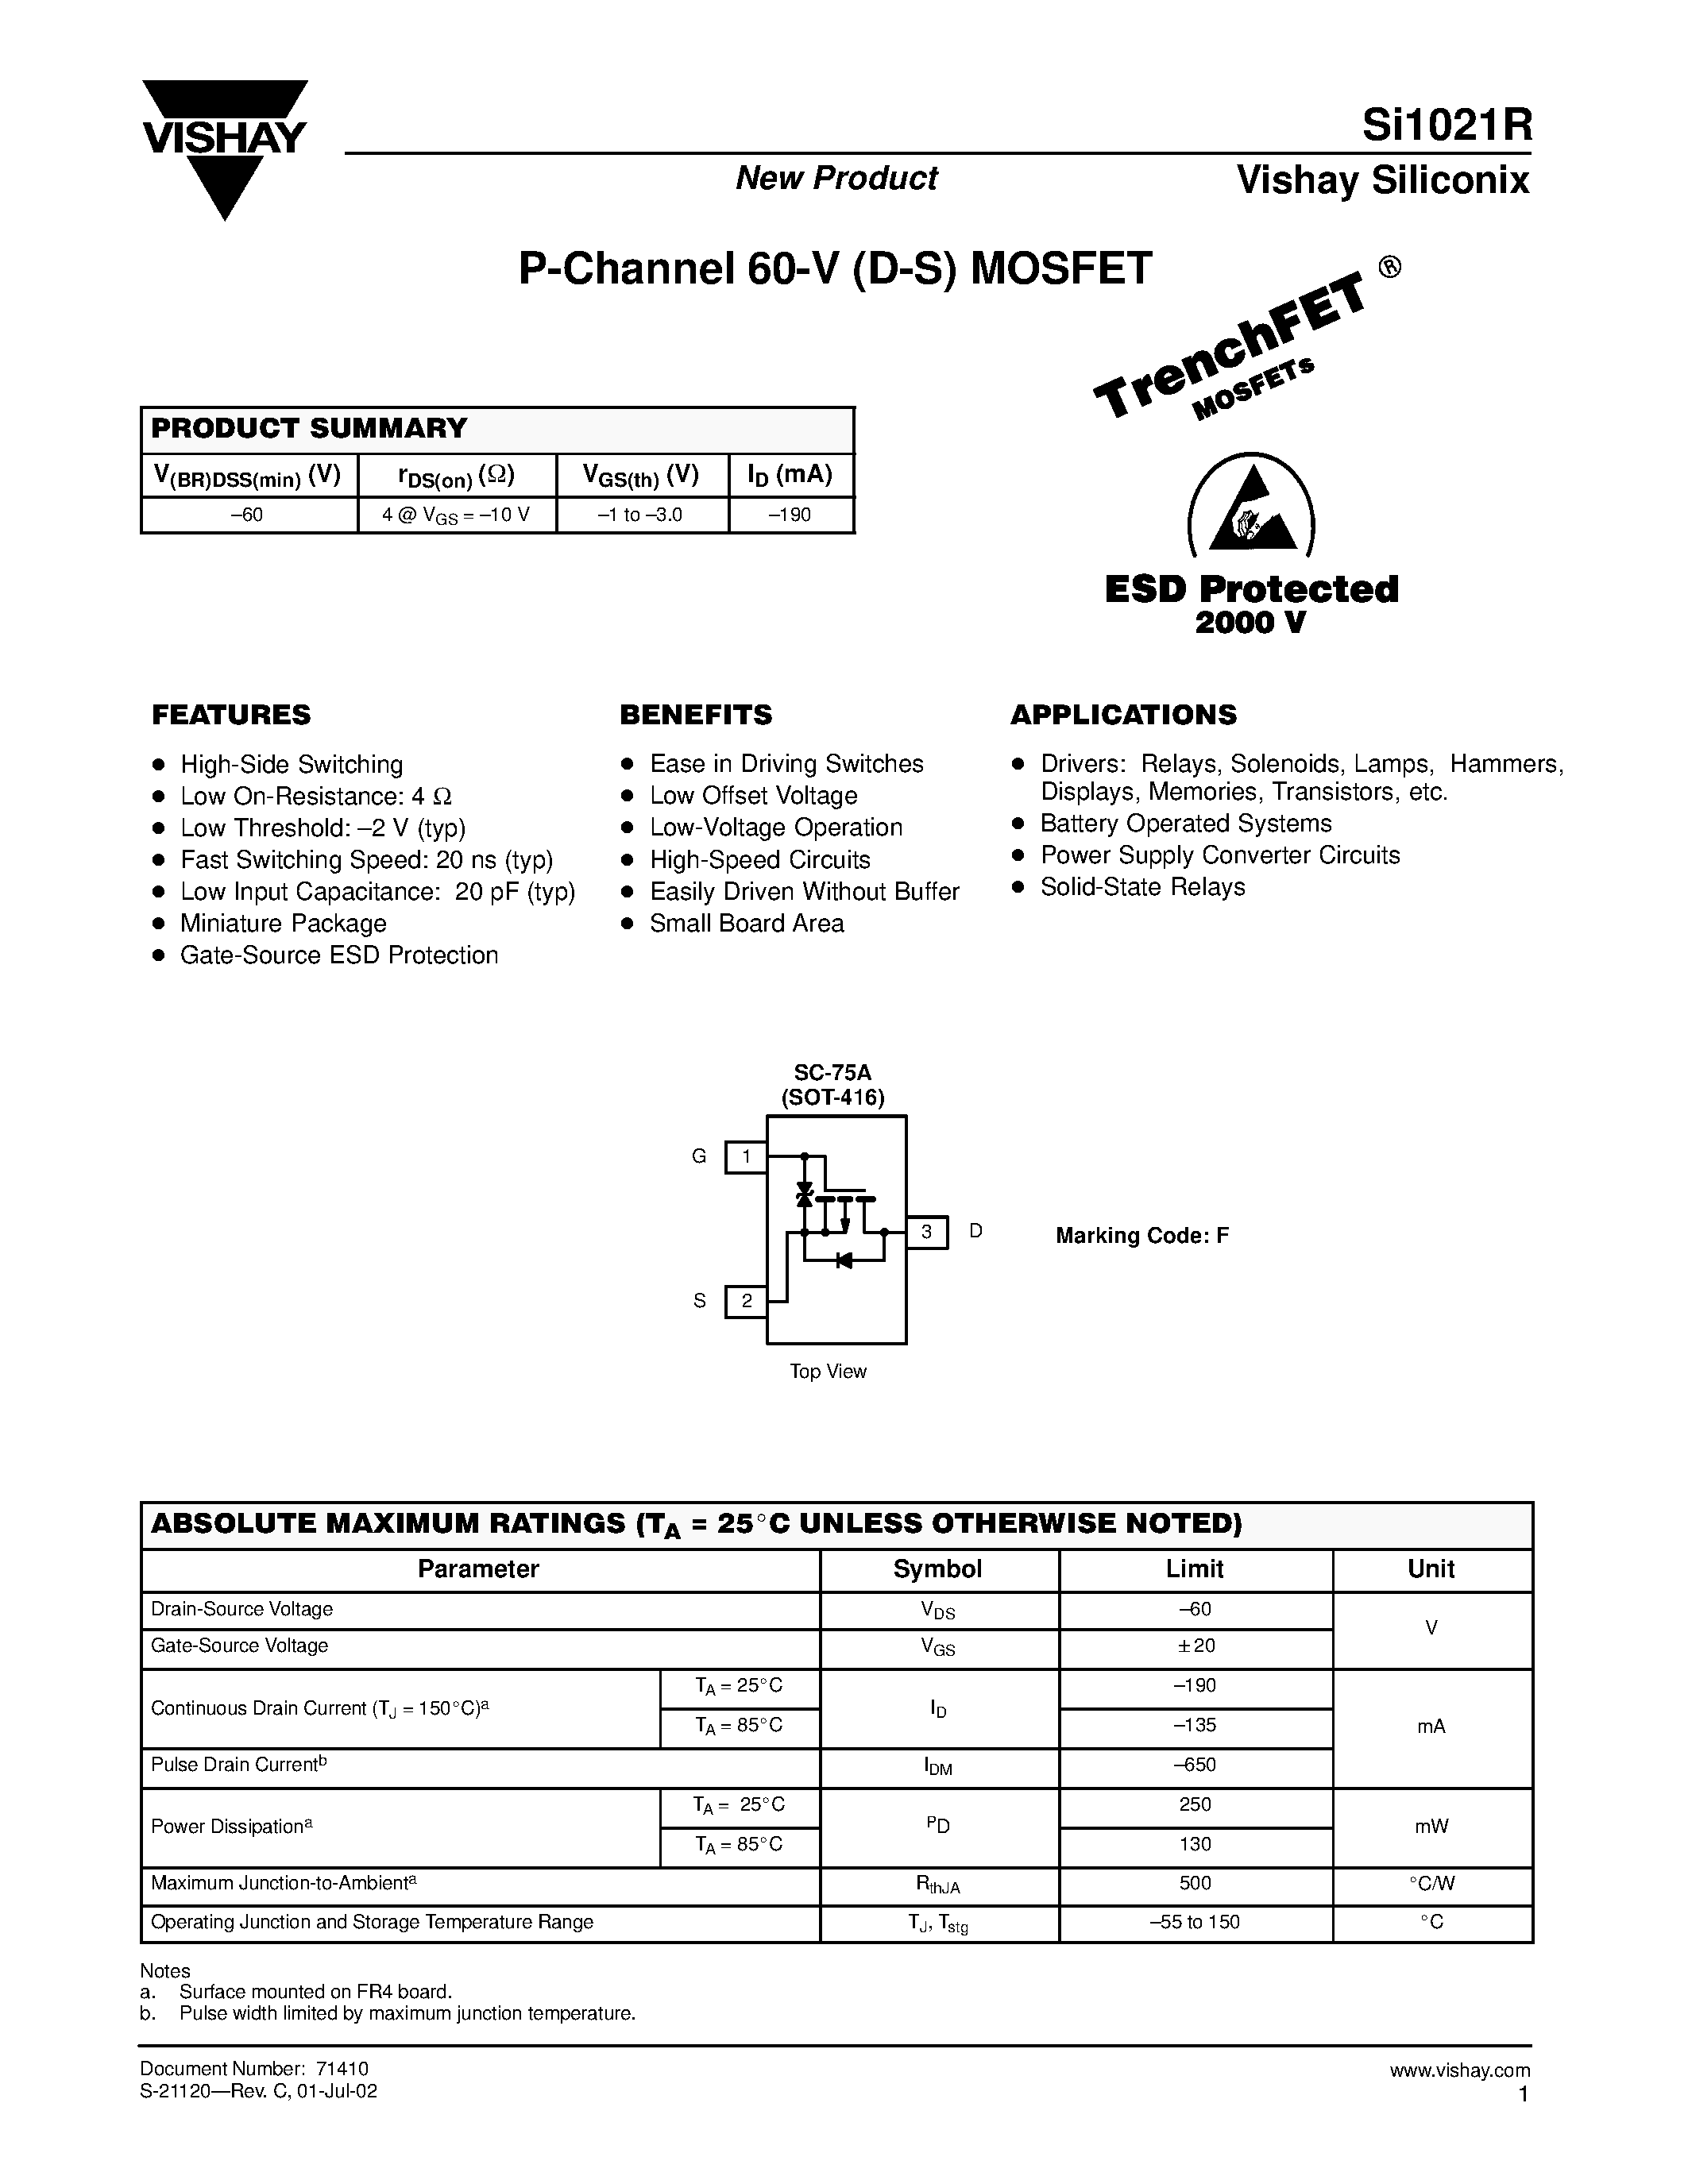 Datasheet SI1021R - P-Channel 60-V (D-S) MOSFET page 1